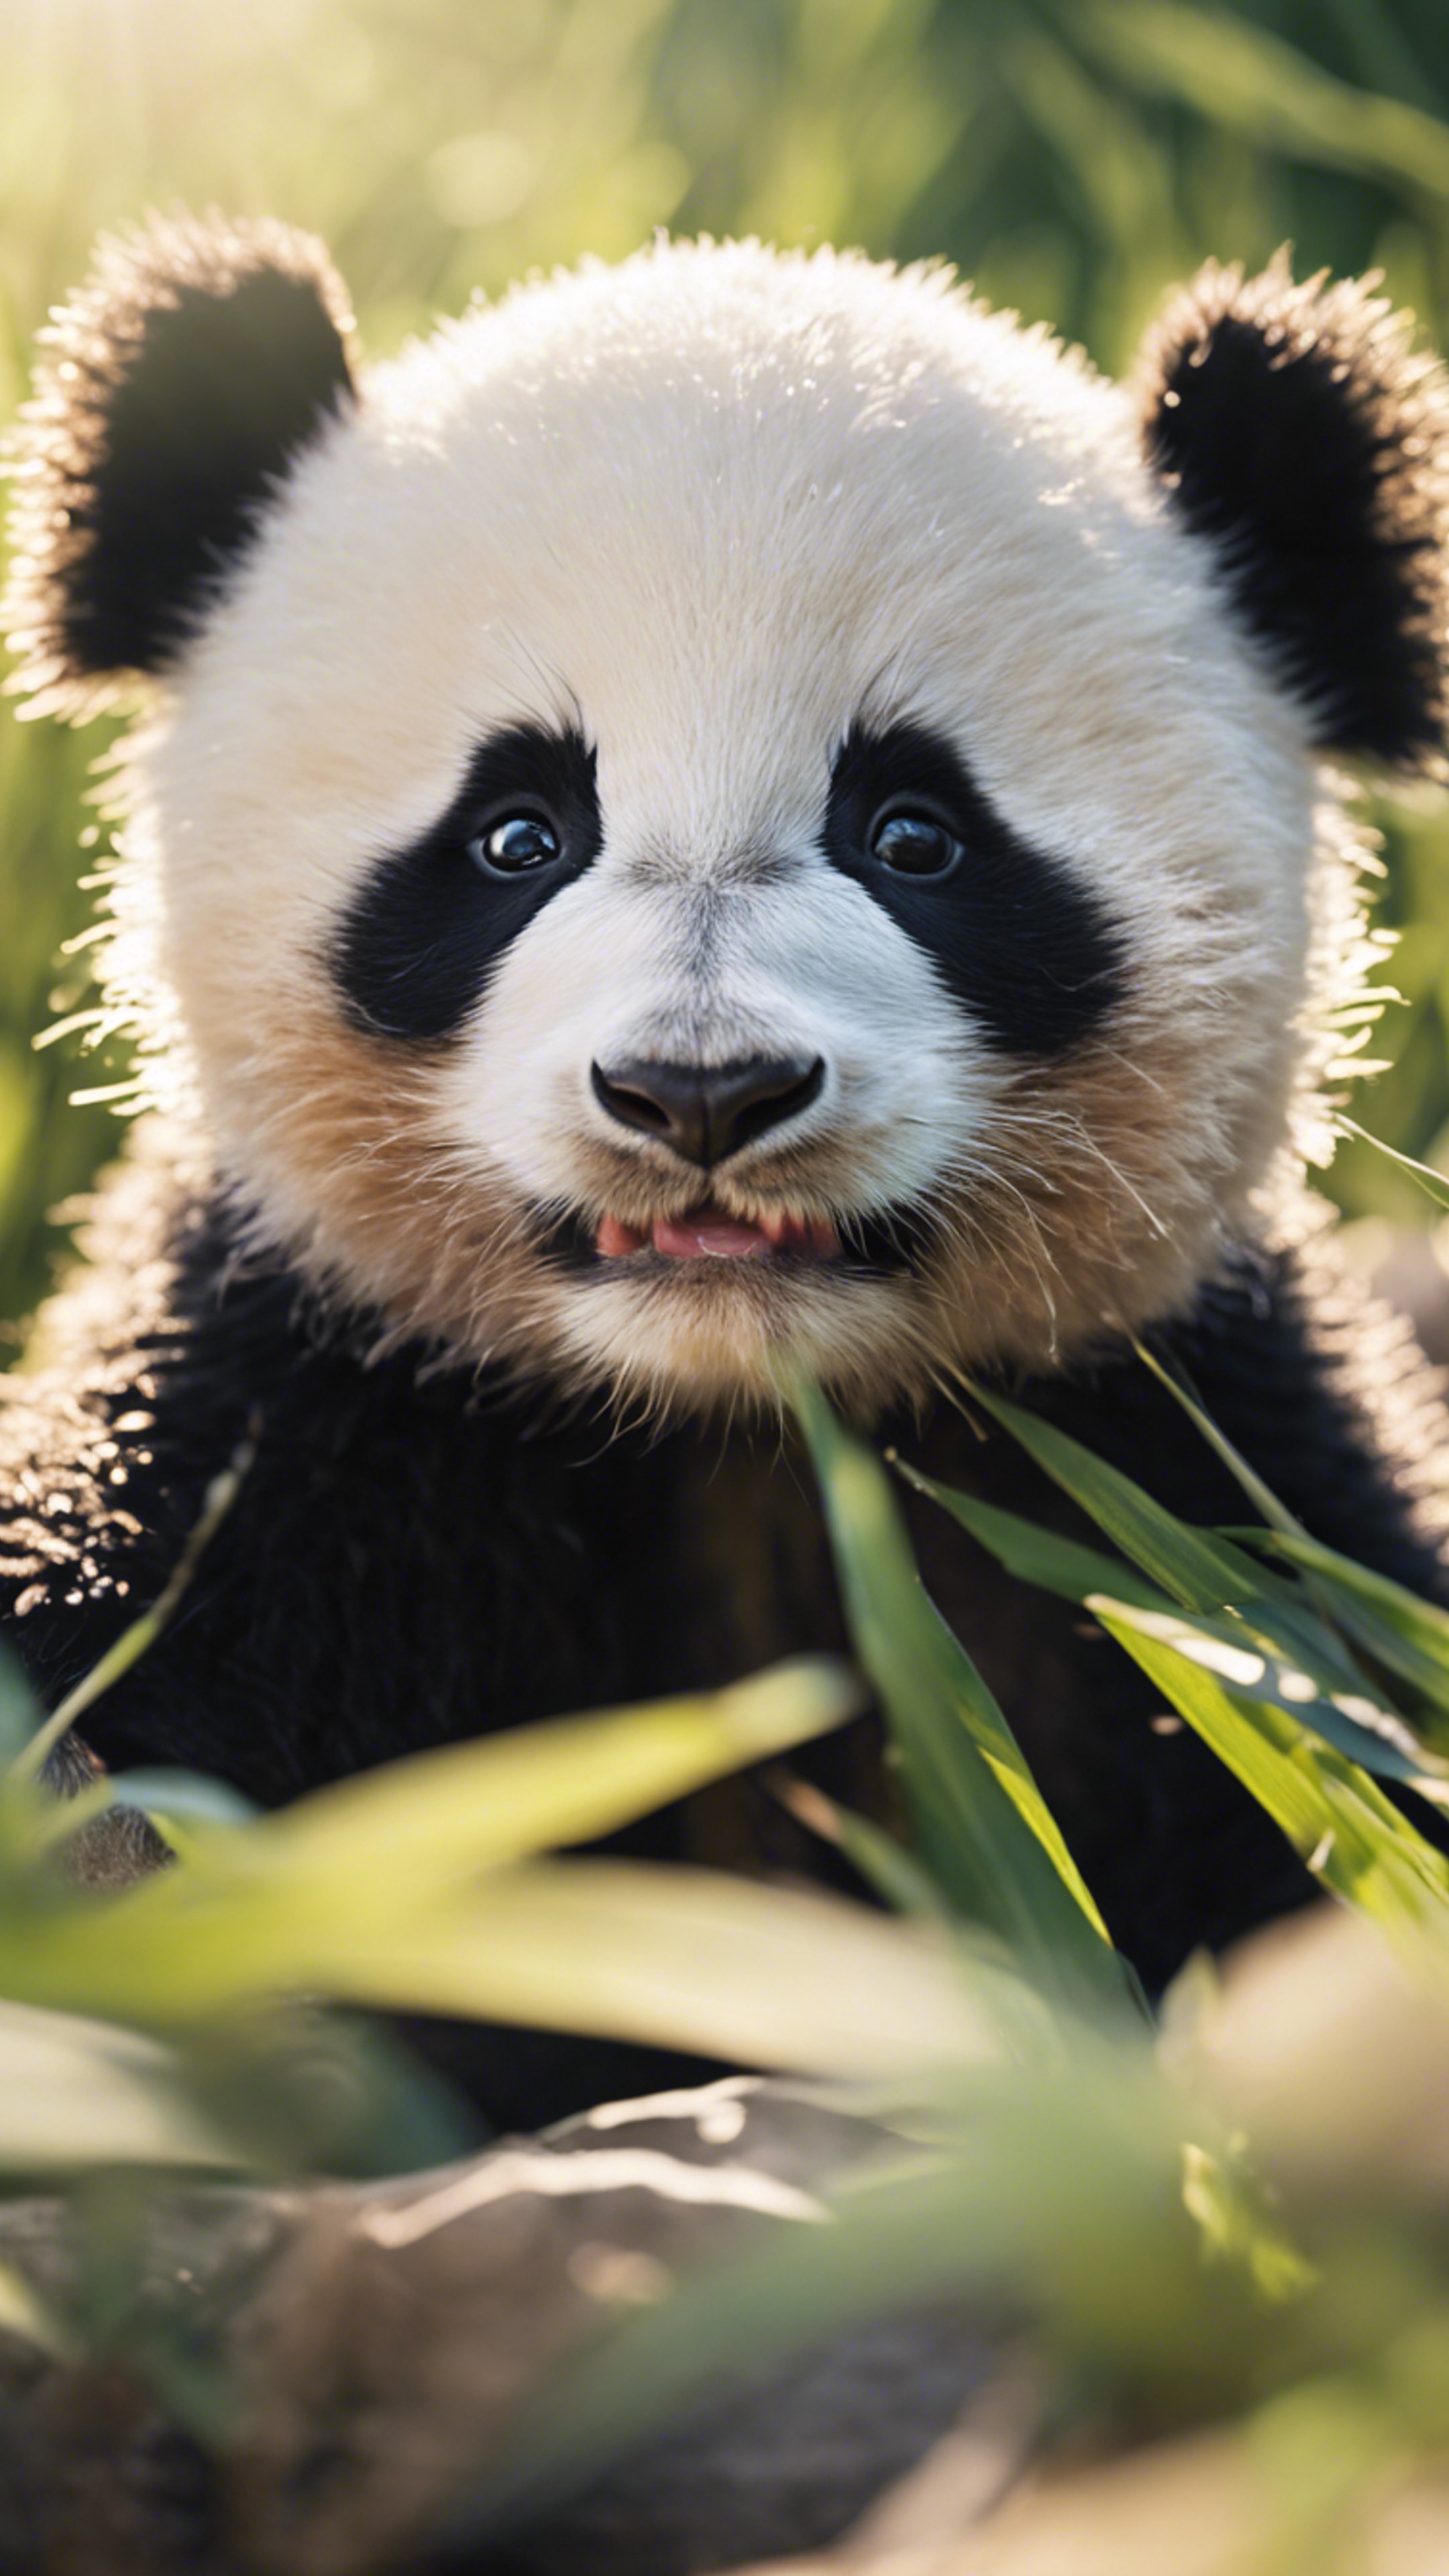 A cheeky panda cub pulling a funny face, under the warm and inviting summer sun. Tapet[260c49d866ff4dc685e3]